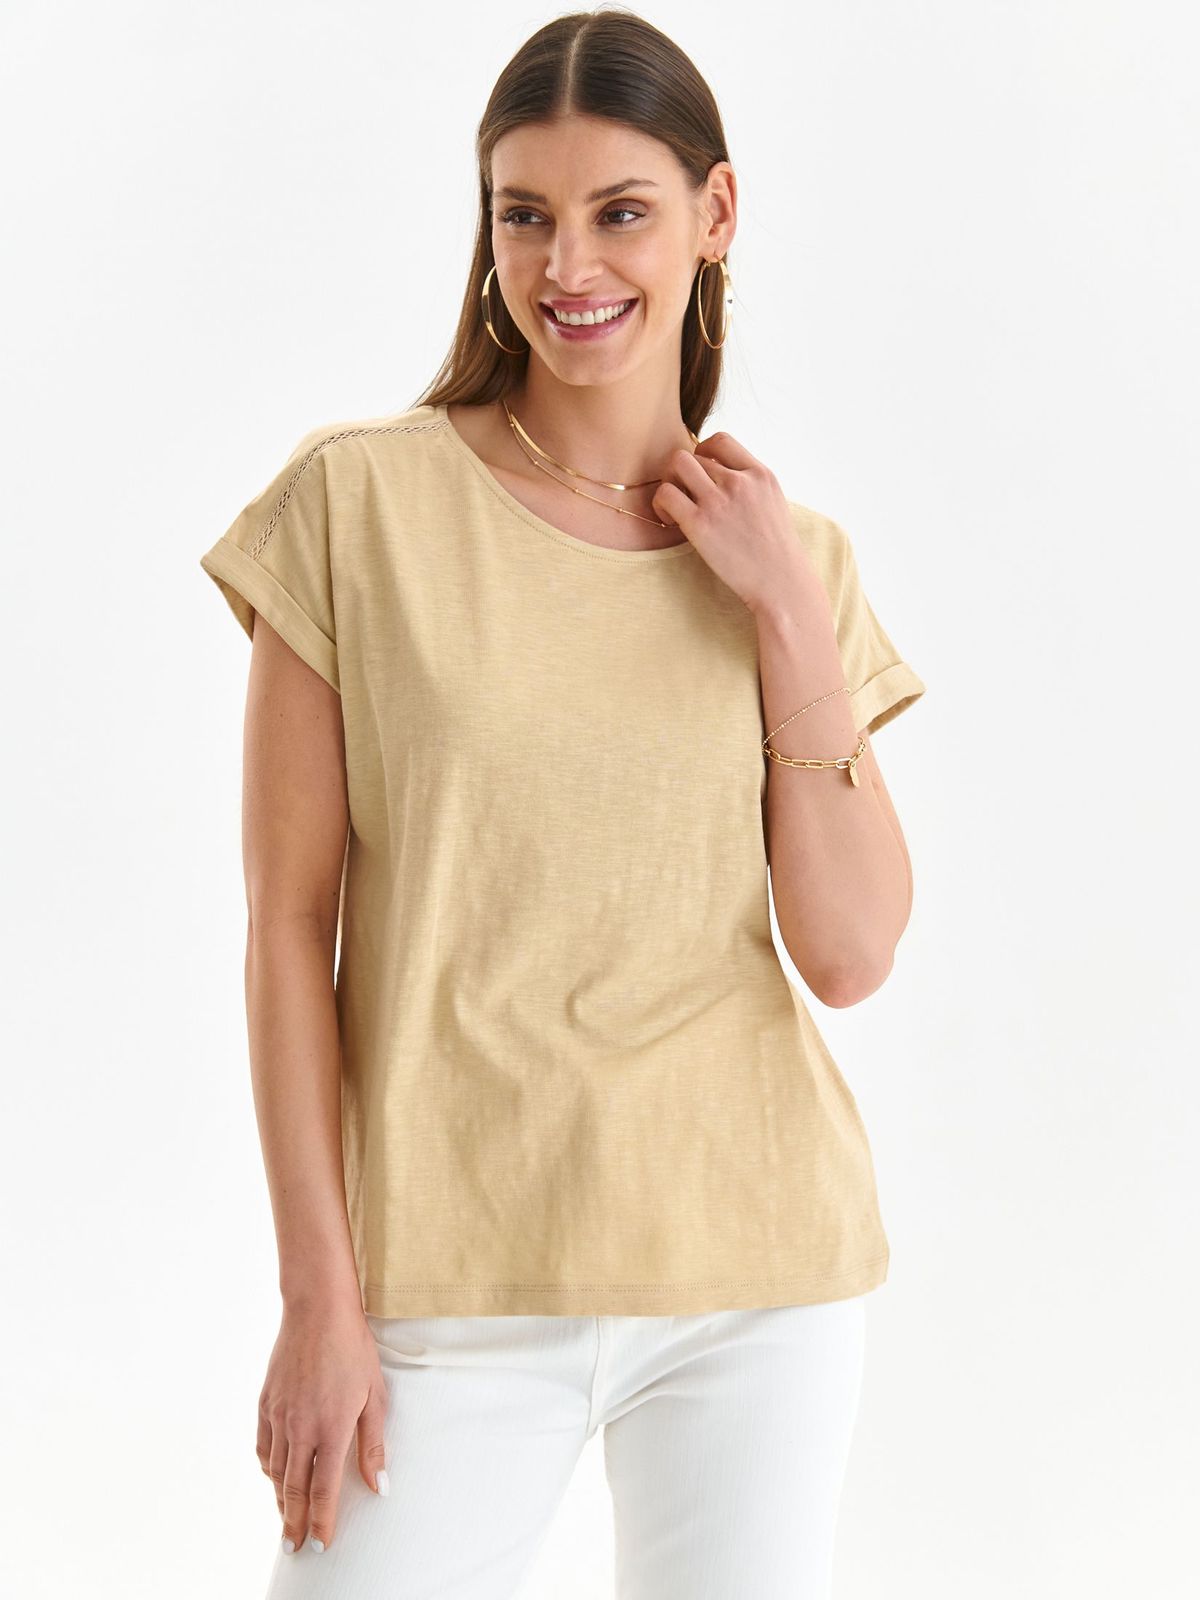 Beige t-shirt loose fit cotton with rounded cleavage